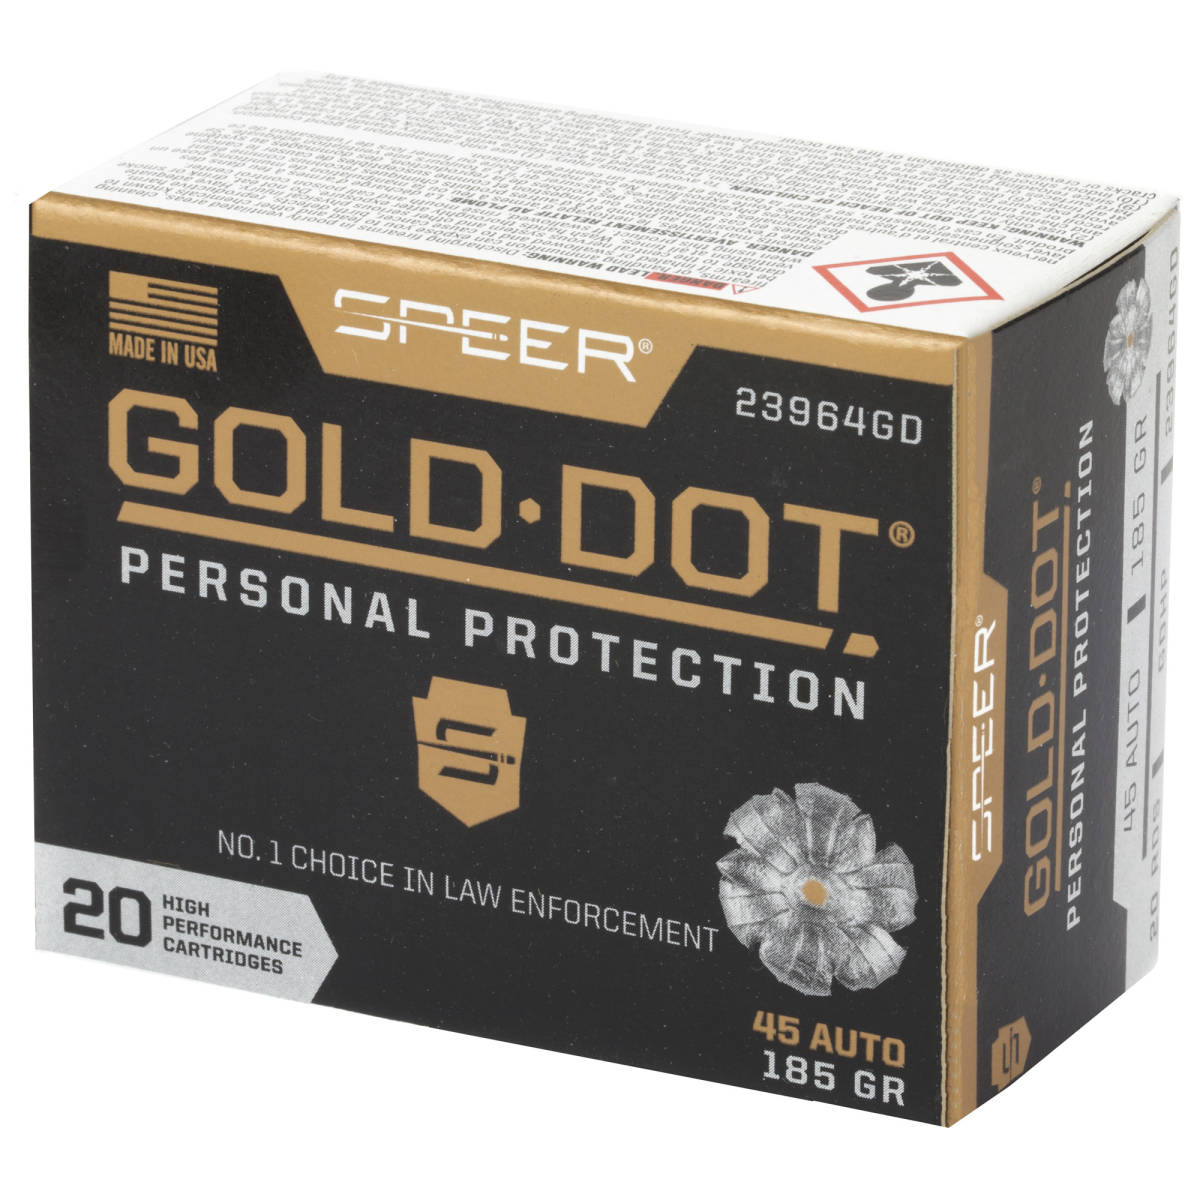 Speer 23964GD Gold Dot Personal Protection 45 ACP 185 gr Hollow Point 20-img-2